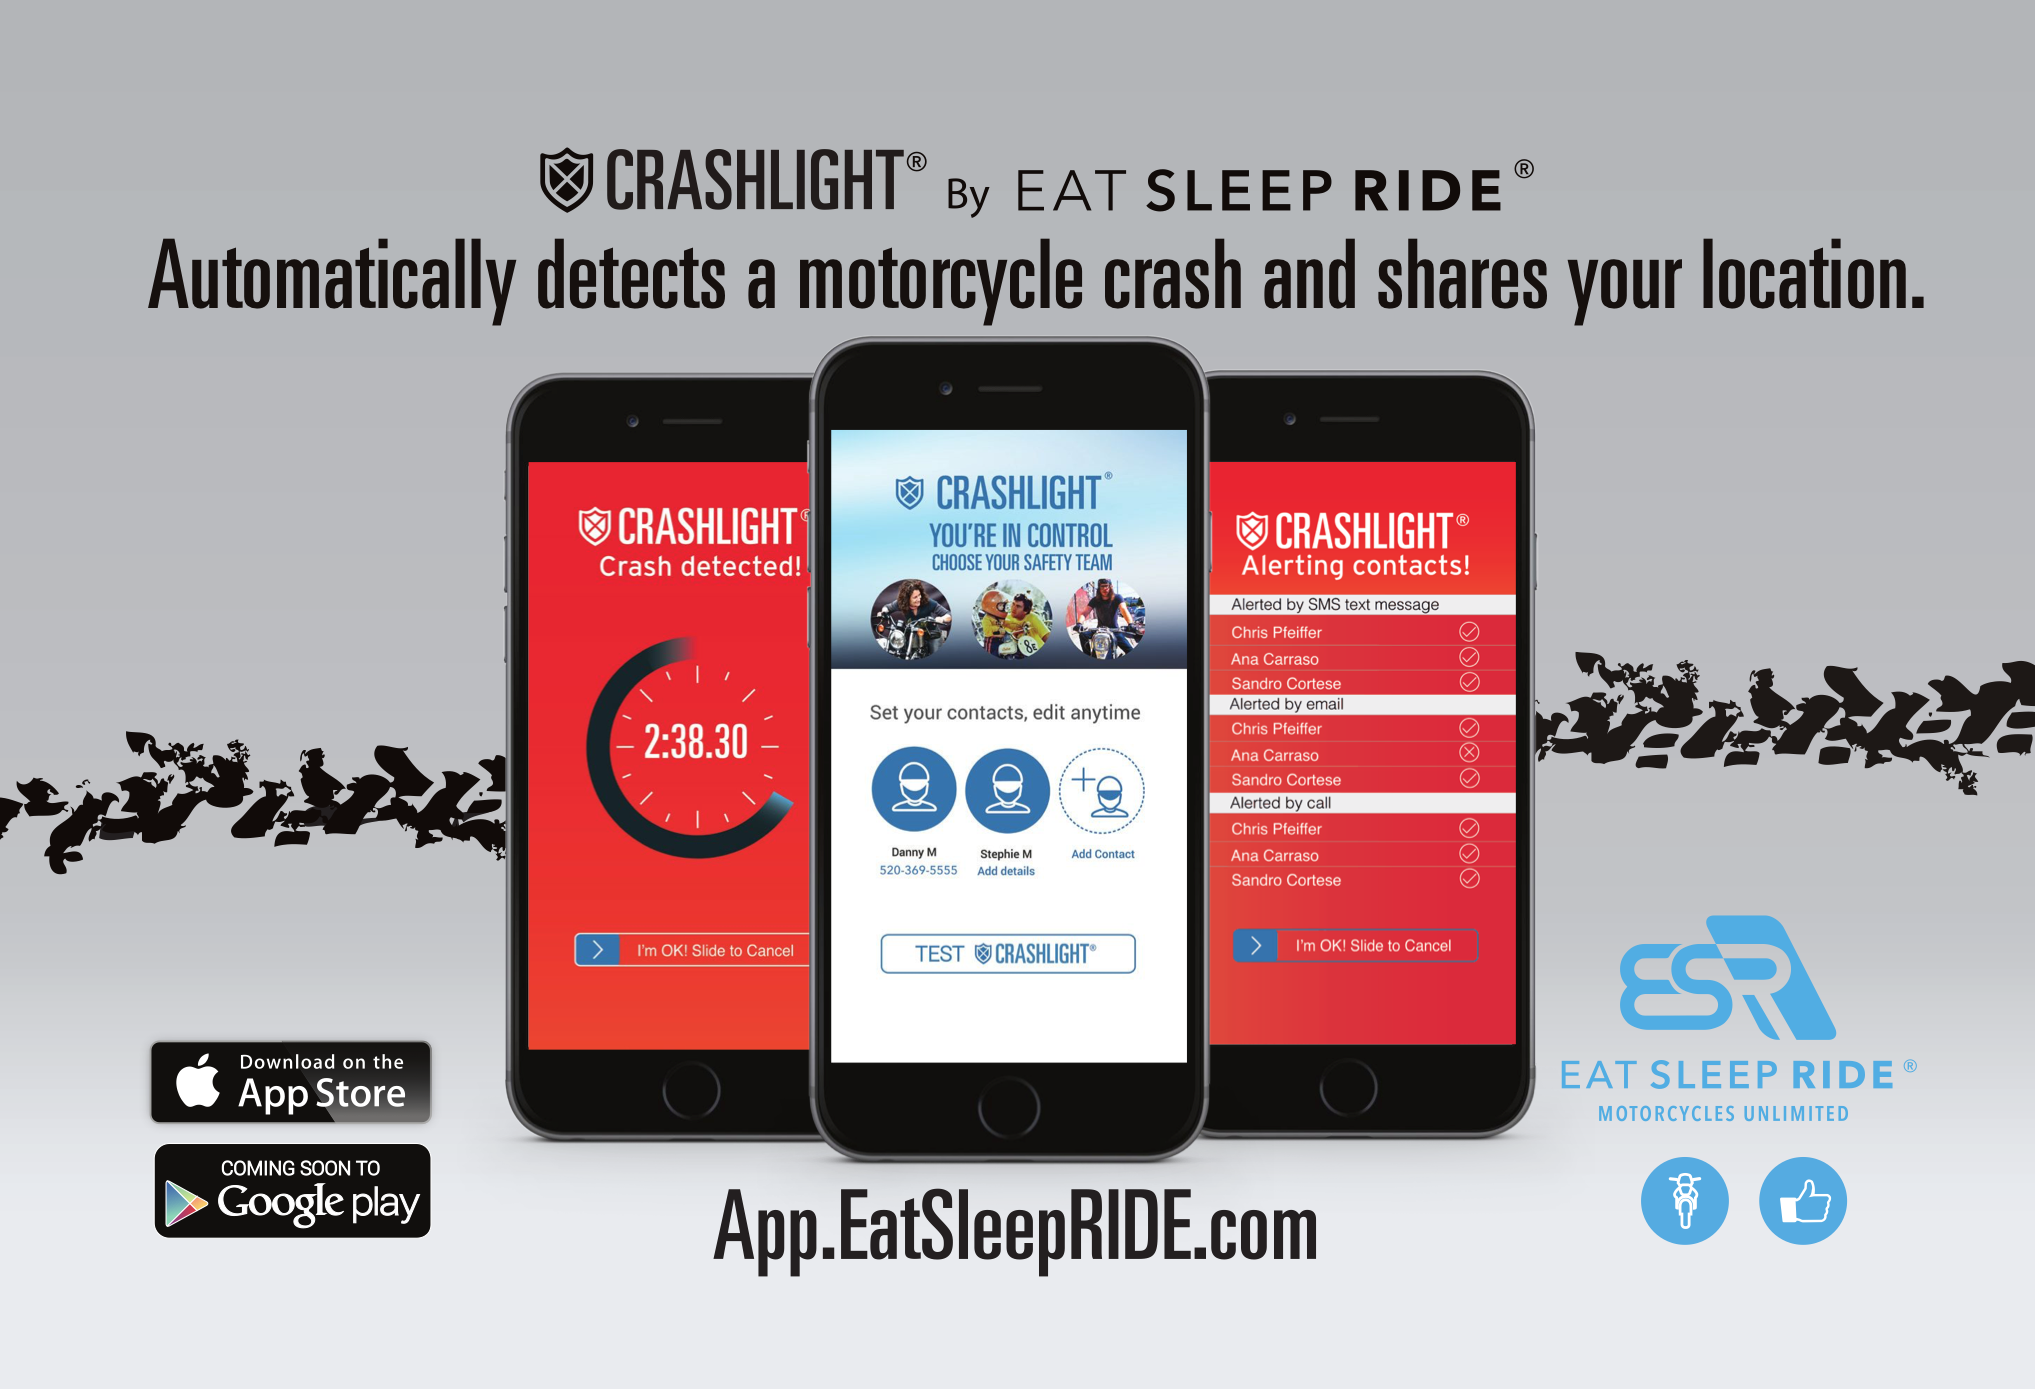 CrashLight® by EatSleepRIDE automatically detects a crash and notifies your contacts